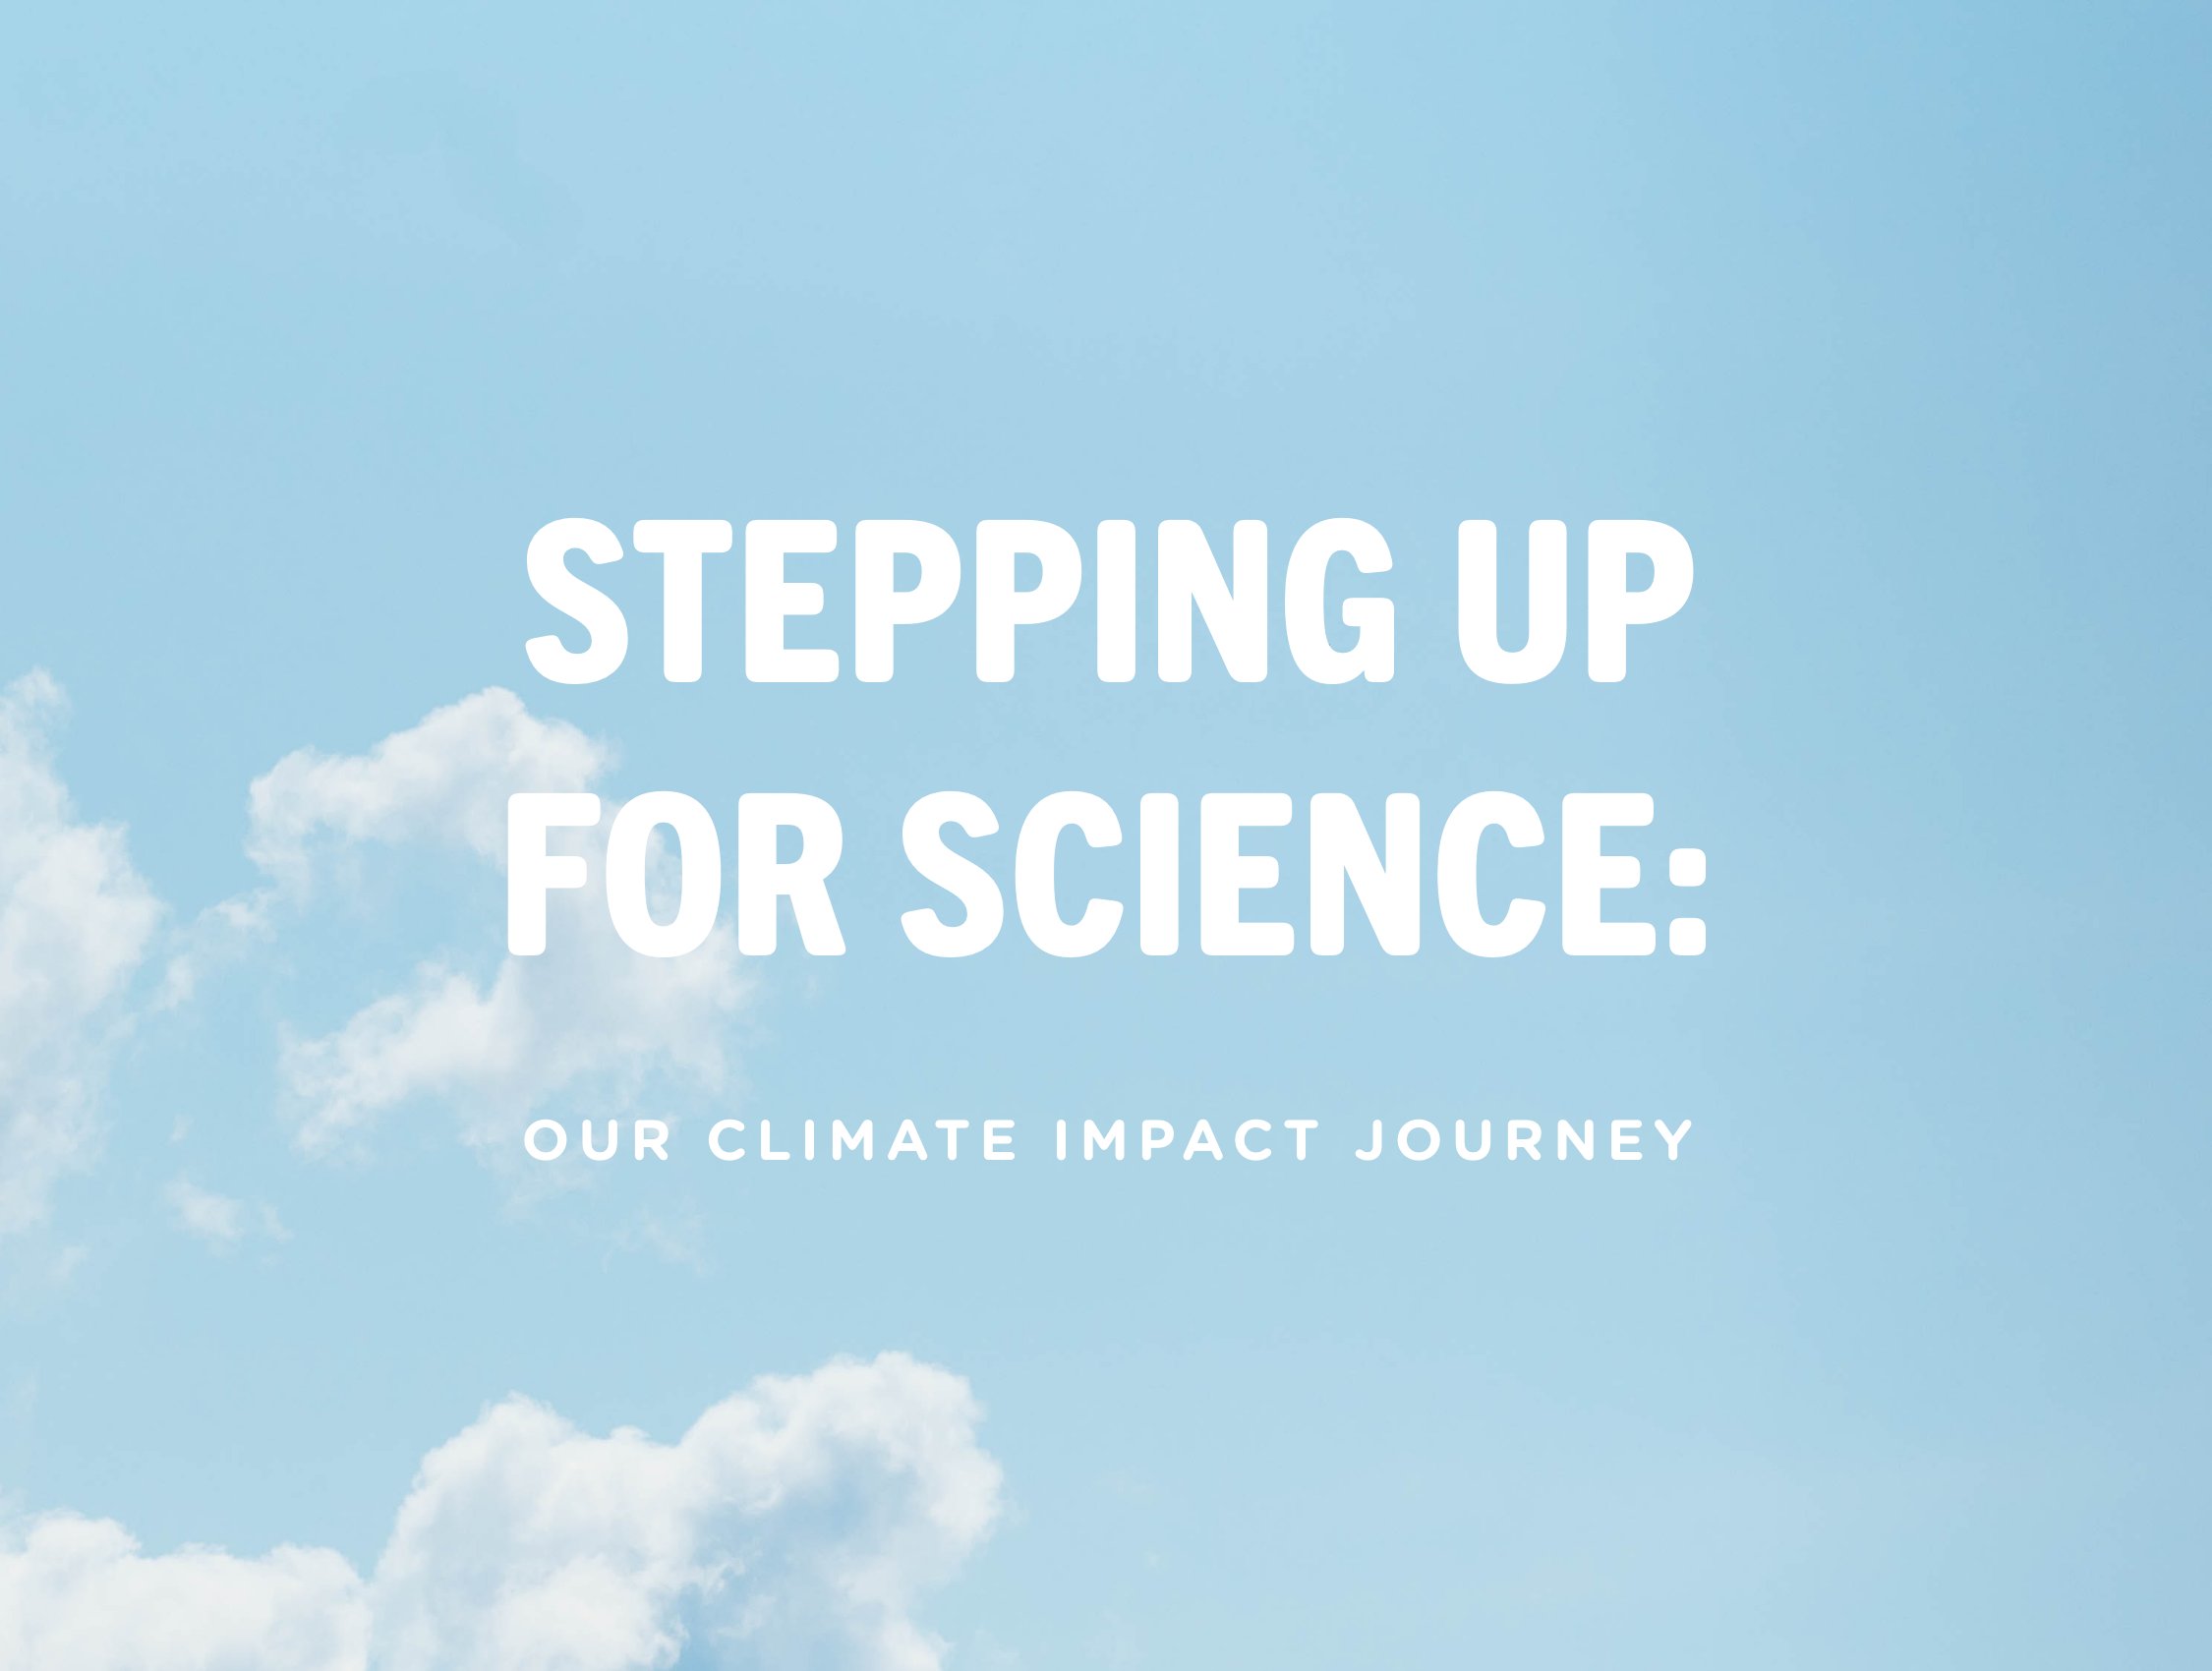 Stepping up for science. Our Climate Impact Journey